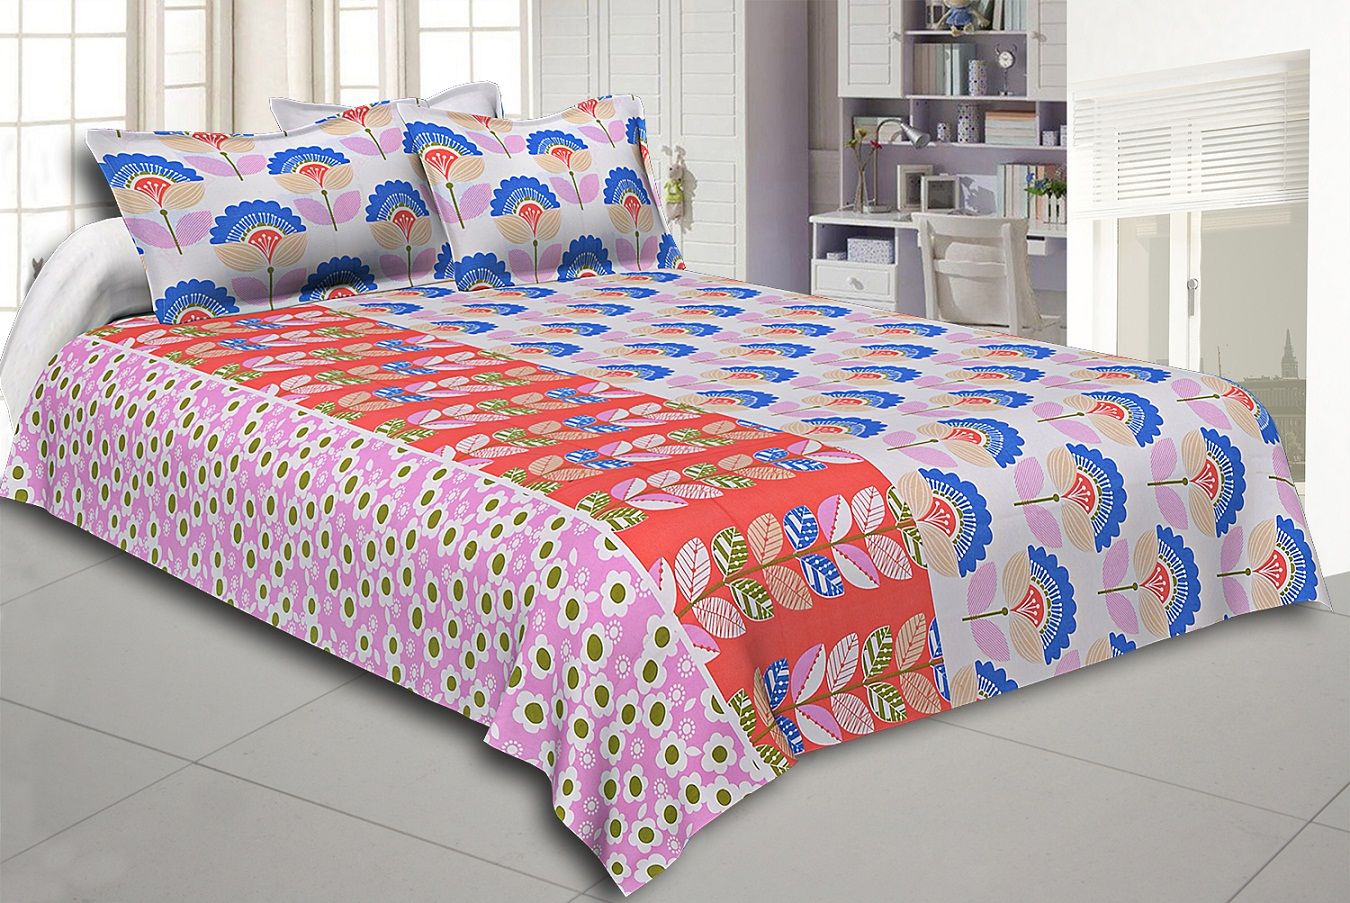 Blue and Orange Floral Print Cotton Double Bed Sheet